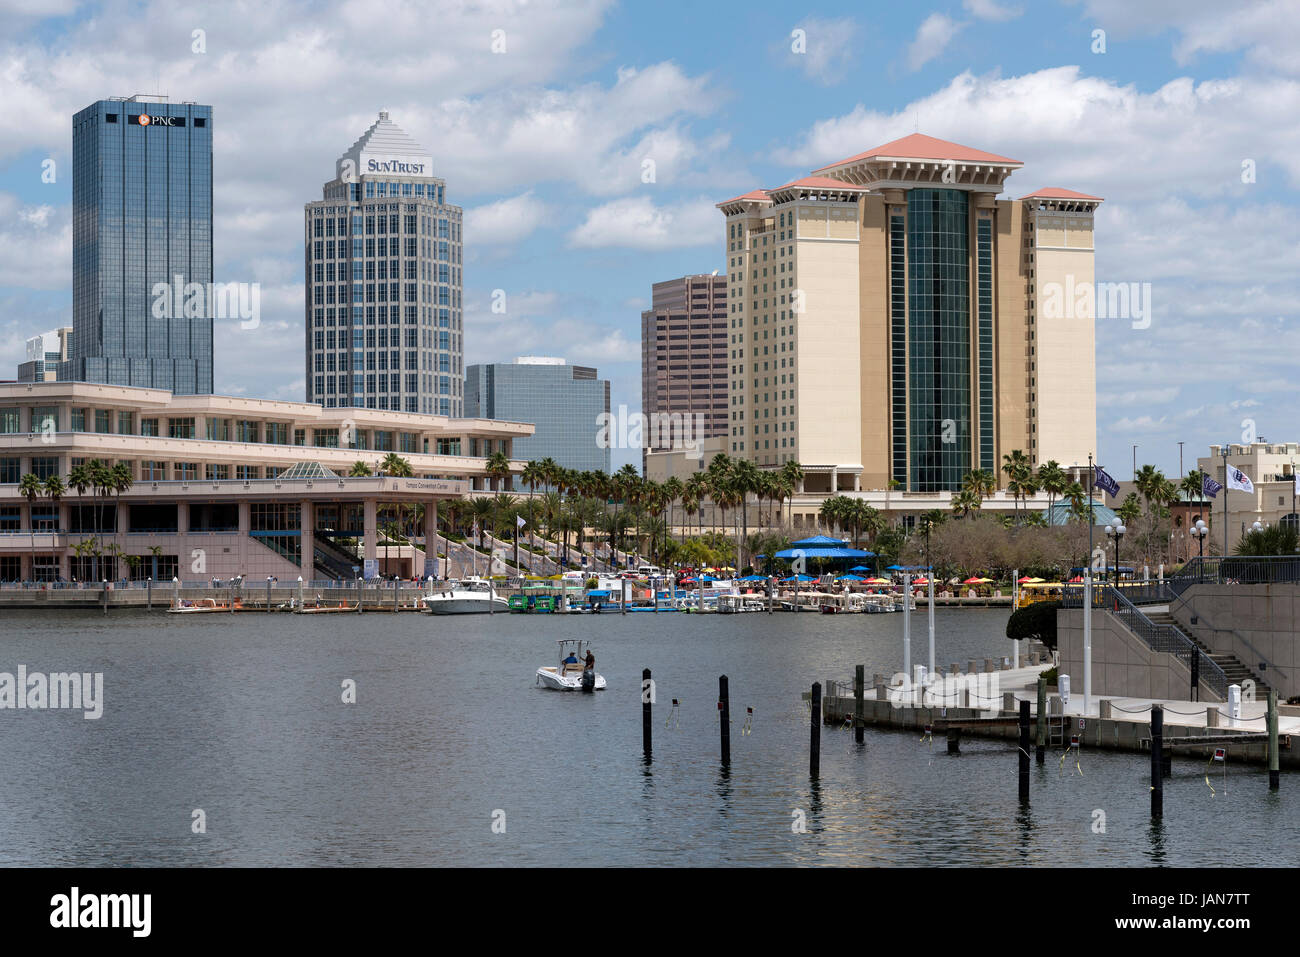 The Tampa Convention Center building and Embassy Suites building on the waterfront downtown Tampa Florida USA. April 2017 Stock Photo